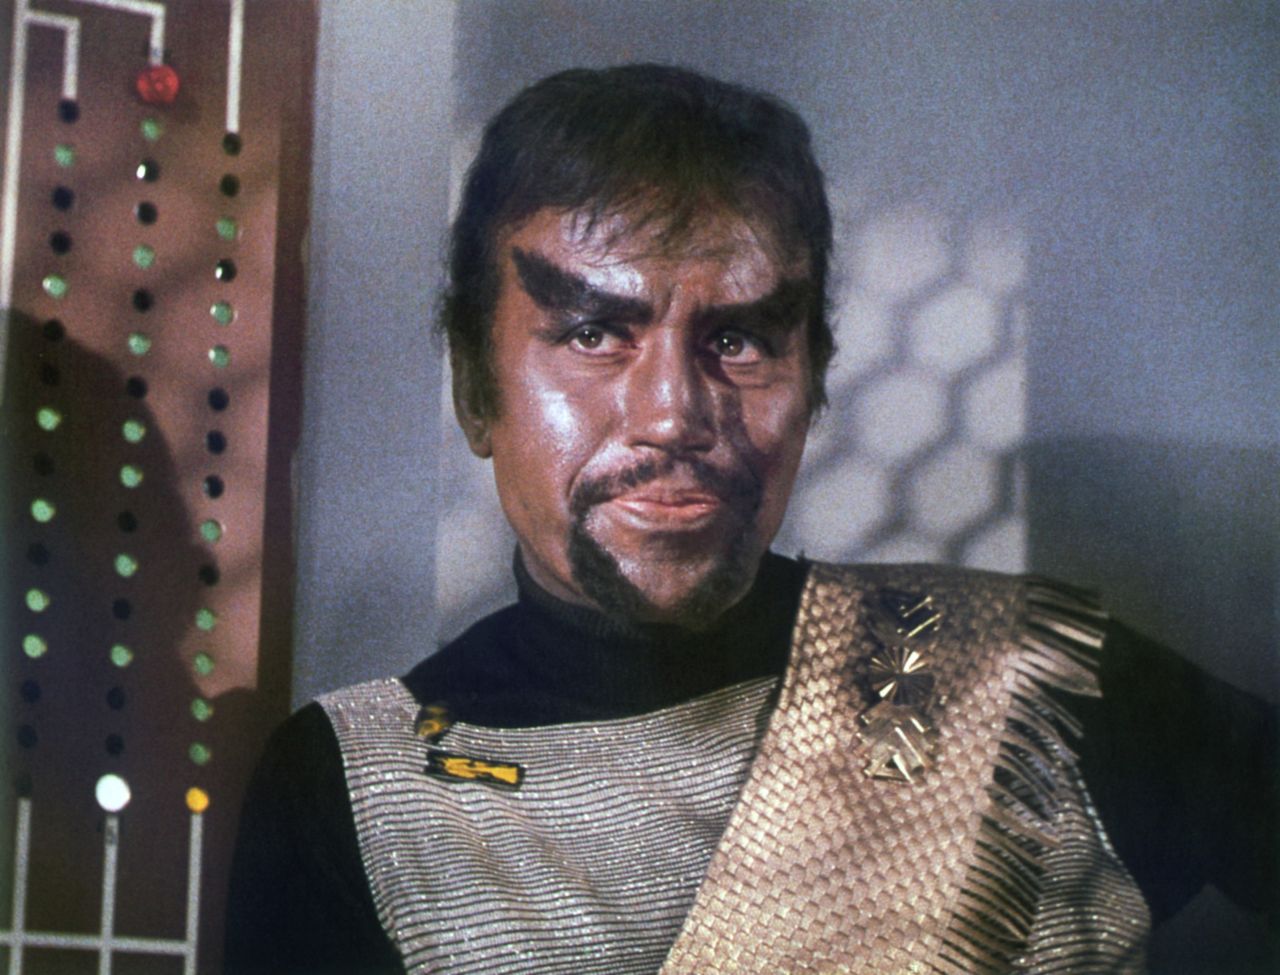 Michael Ansara, best known for playing the Klingon leader Kang, has died at age 91.  Ansara originally played Kang in original "Star Trek" series and then reprised the role for "Star Trek: Deep Space Nine" and "Star Trek: Voyager."